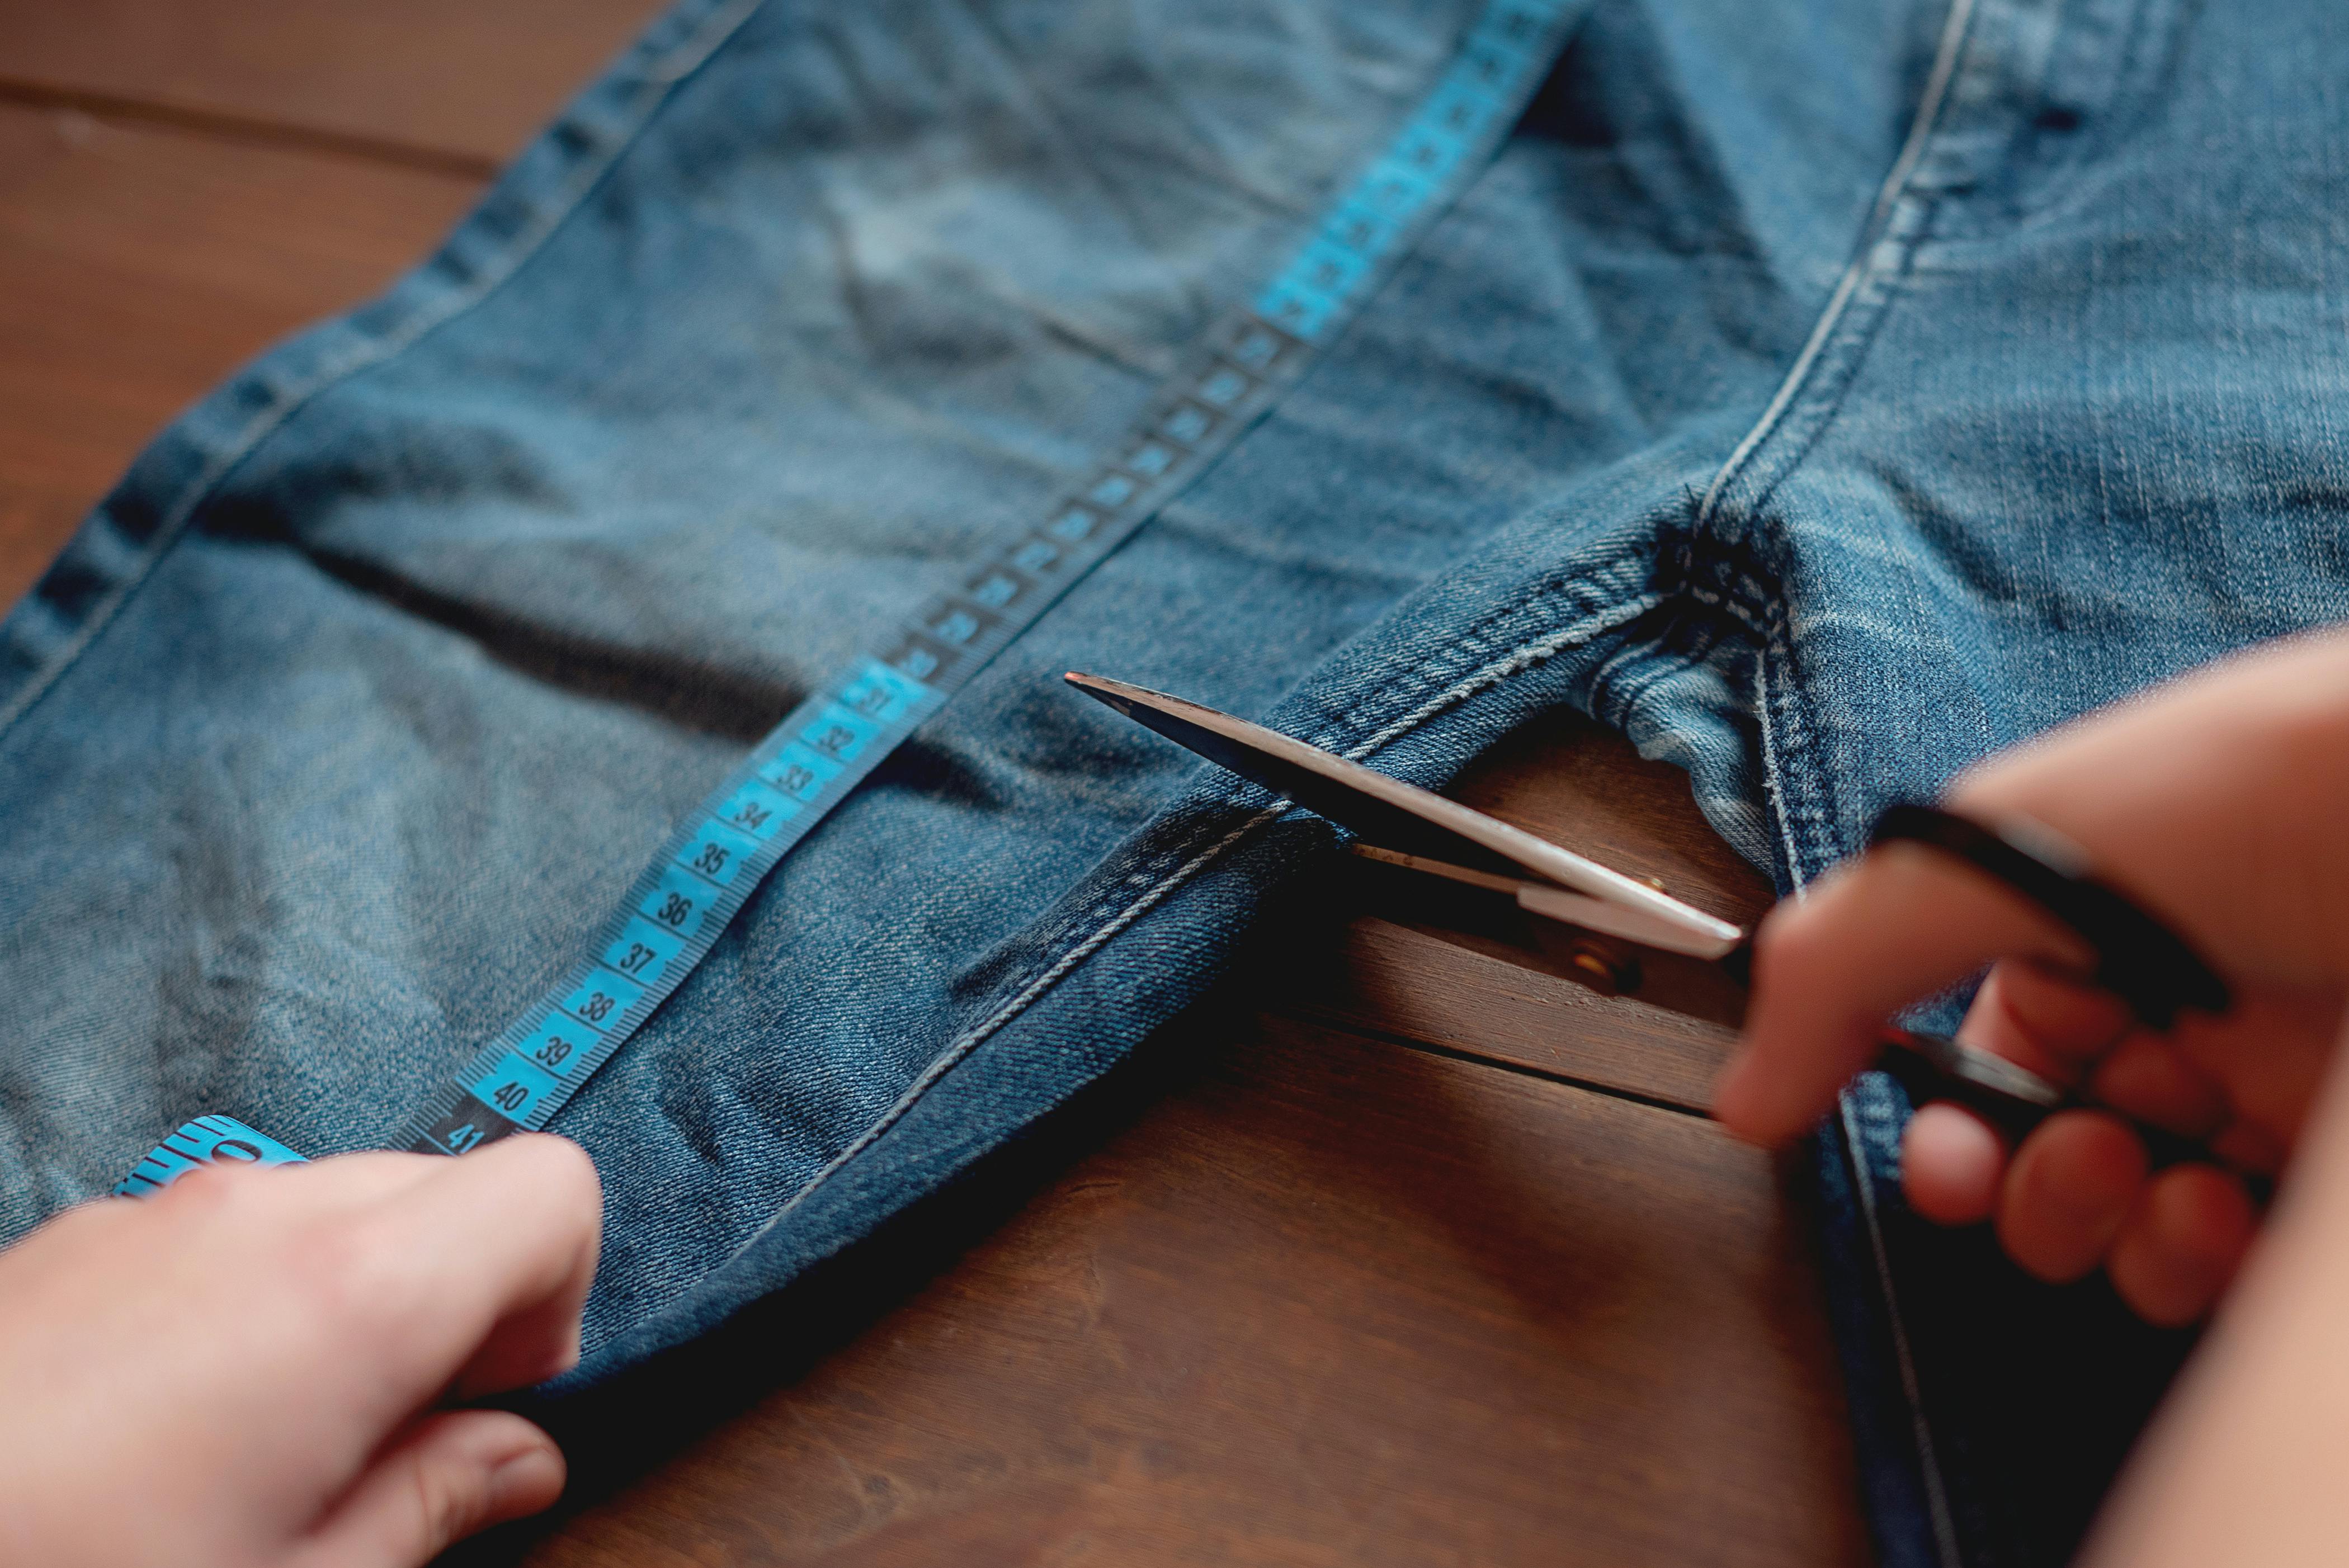  hands cutting denim jeans into shorts using a measuring tape and scissors